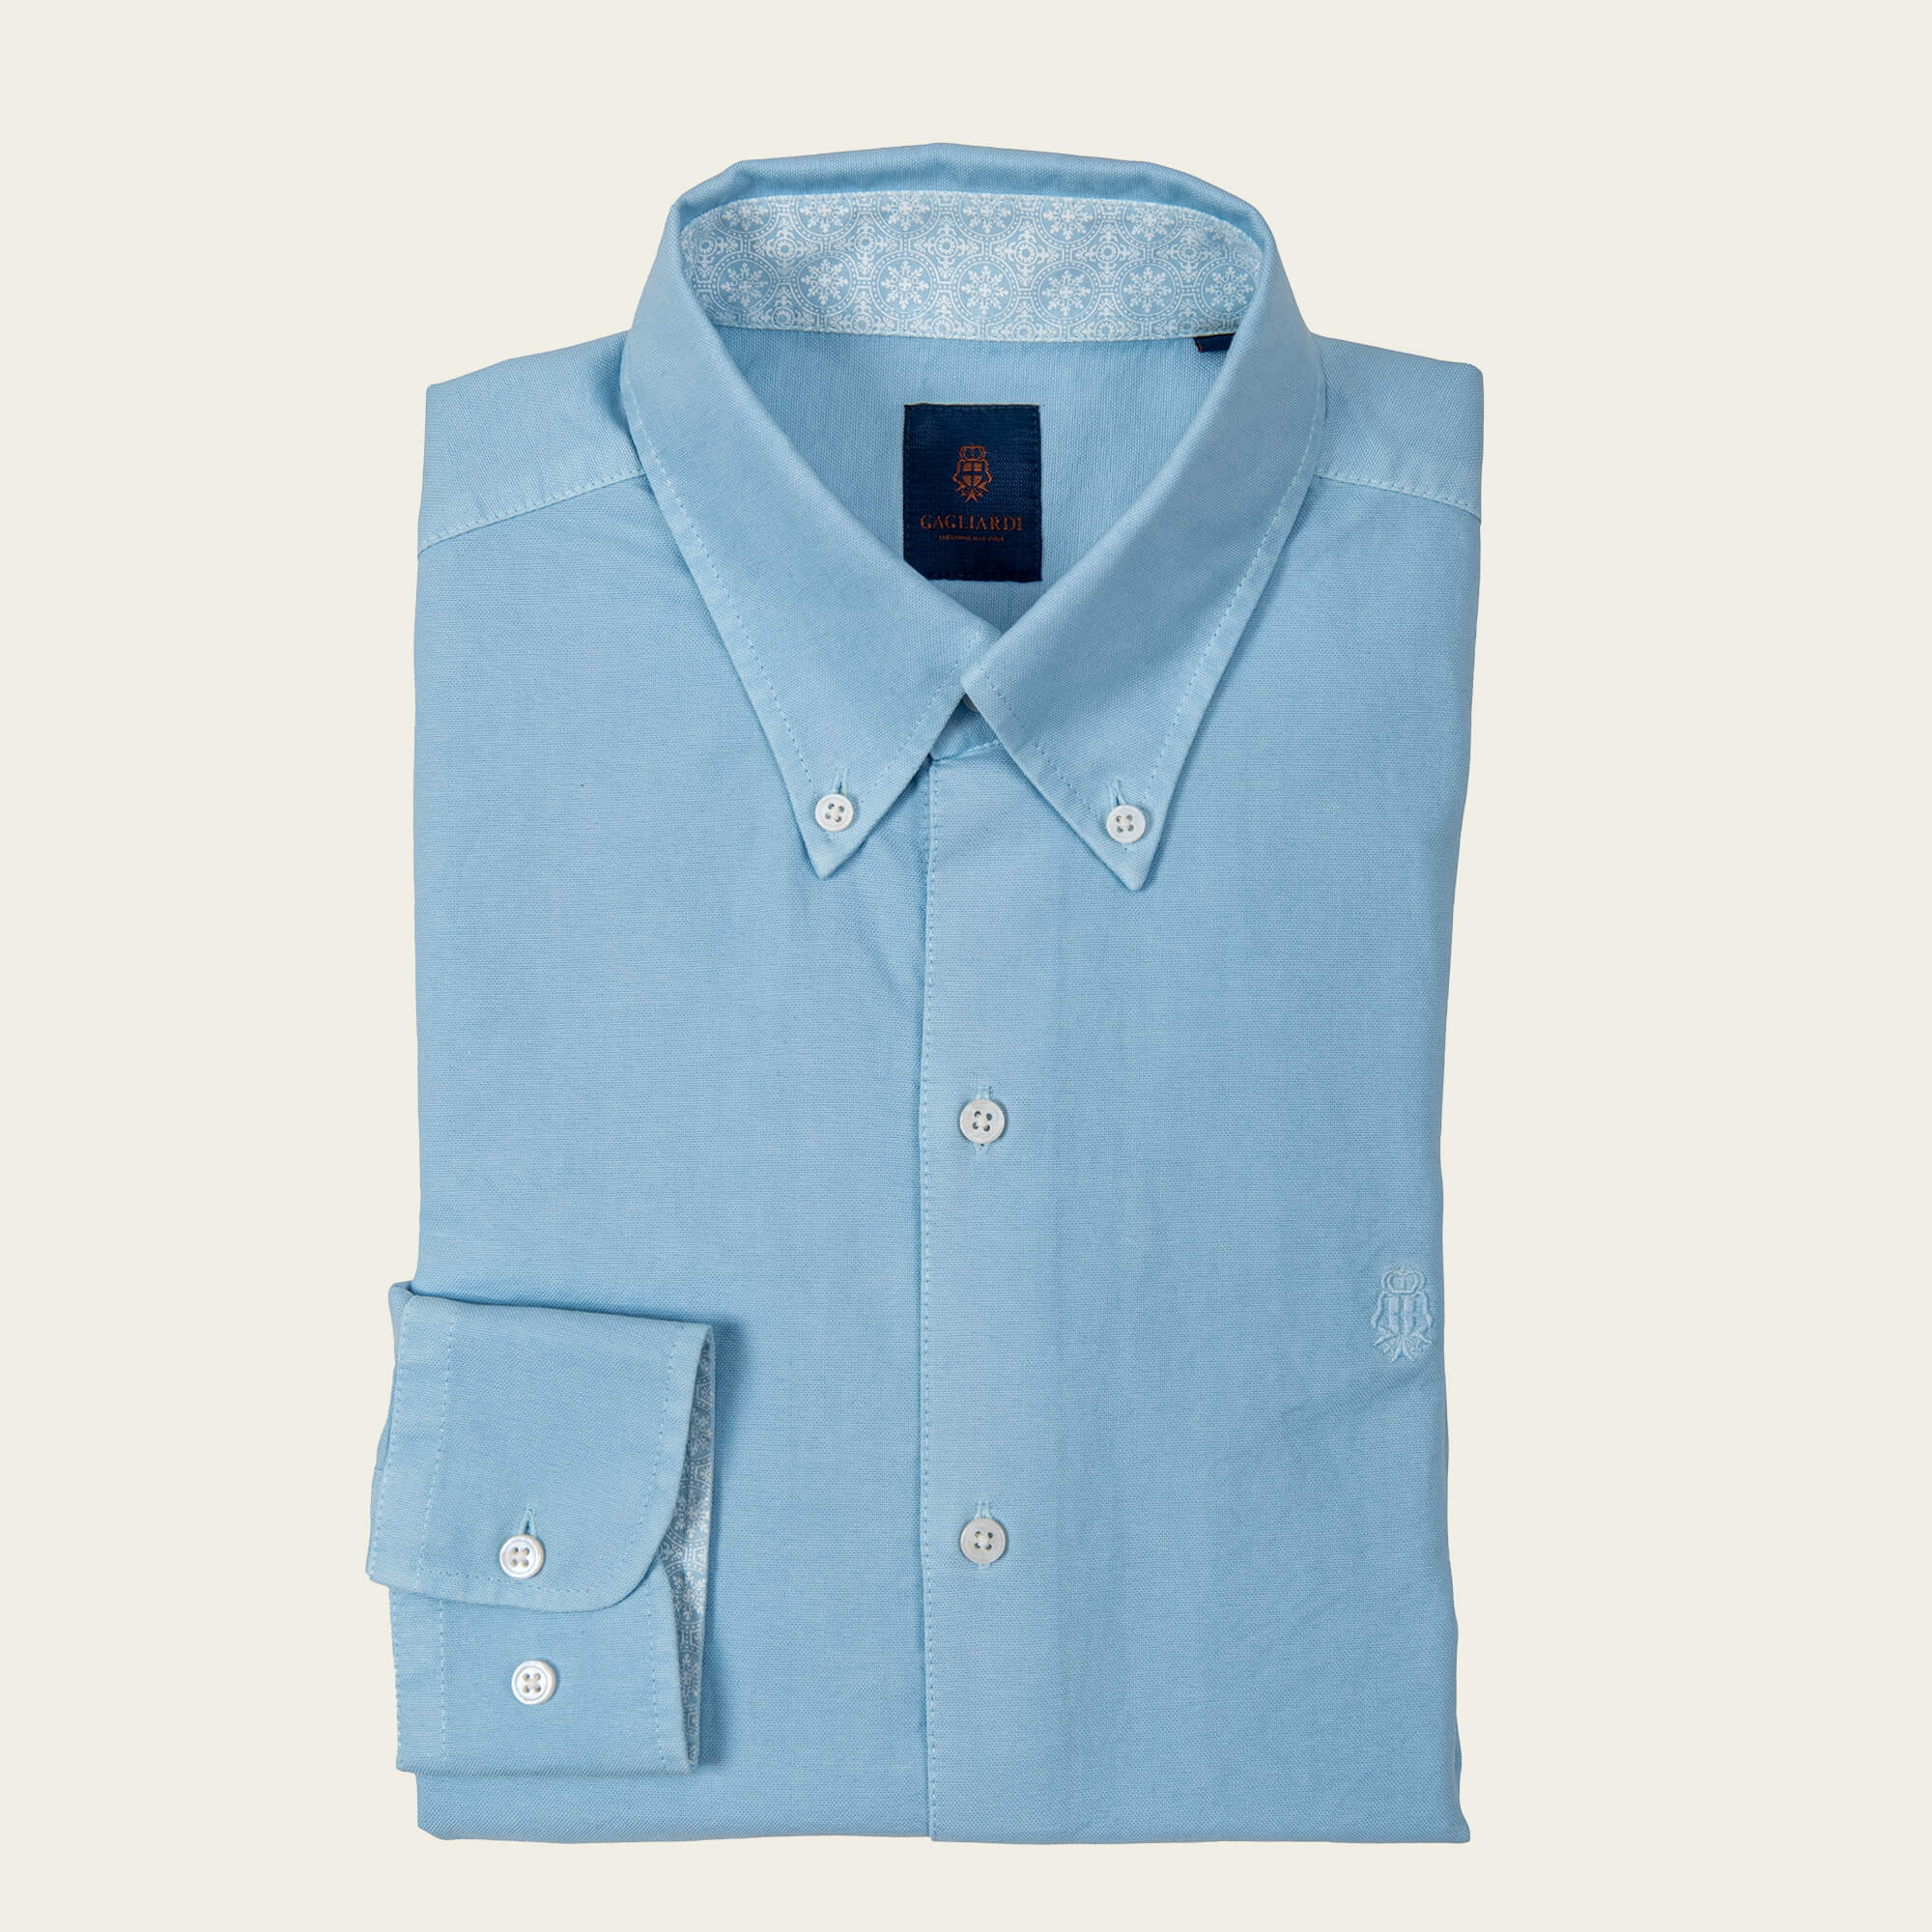 Sky Tailored Fit Oxford Button Down Shirt